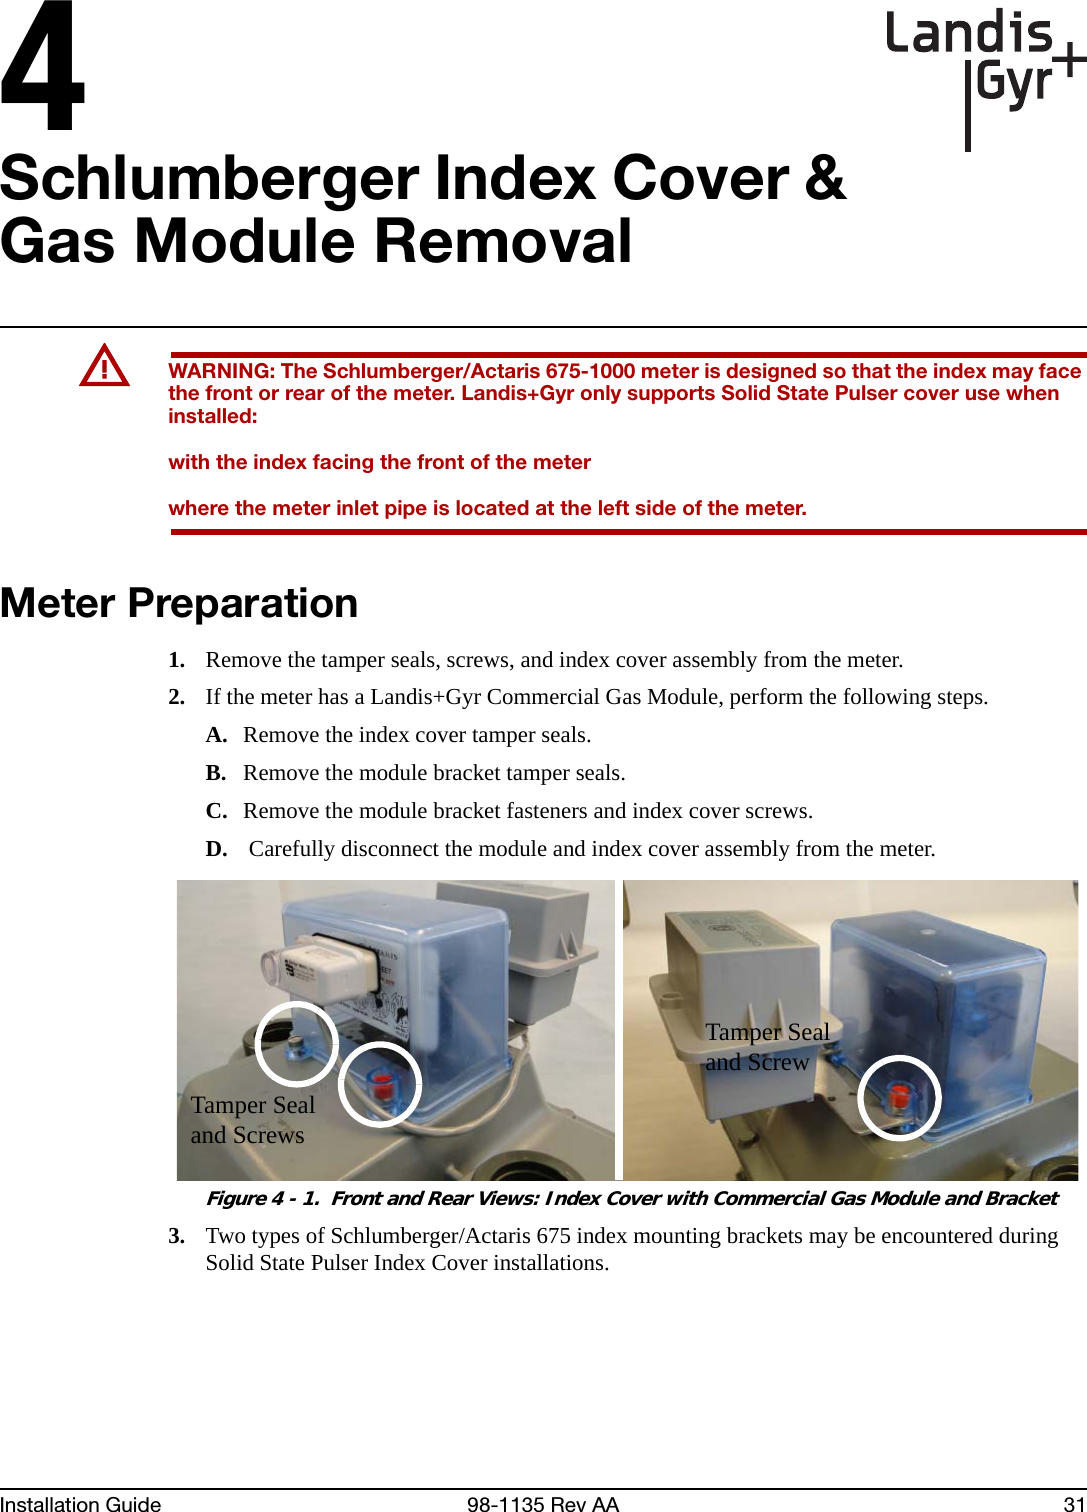 4Installation Guide 98-1135 Rev AA 31Schlumberger Index Cover &amp; Gas Module RemovalUWARNING: The Schlumberger/Actaris 675-1000 meter is designed so that the index may face the front or rear of the meter. Landis+Gyr only supports Solid State Pulser cover use when installed:with the index facing the front of the meterwhere the meter inlet pipe is located at the left side of the meter.Meter Preparation1. Remove the tamper seals, screws, and index cover assembly from the meter.2. If the meter has a Landis+Gyr Commercial Gas Module, perform the following steps.A. Remove the index cover tamper seals.B. Remove the module bracket tamper seals.C. Remove the module bracket fasteners and index cover screws.D.  Carefully disconnect the module and index cover assembly from the meter. Figure 4 - 1.  Front and Rear Views: Index Cover with Commercial Gas Module and Bracket3. Two types of Schlumberger/Actaris 675 index mounting brackets may be encountered during Solid State Pulser Index Cover installations. Tamper Seal and ScrewTamper Seal and Screws